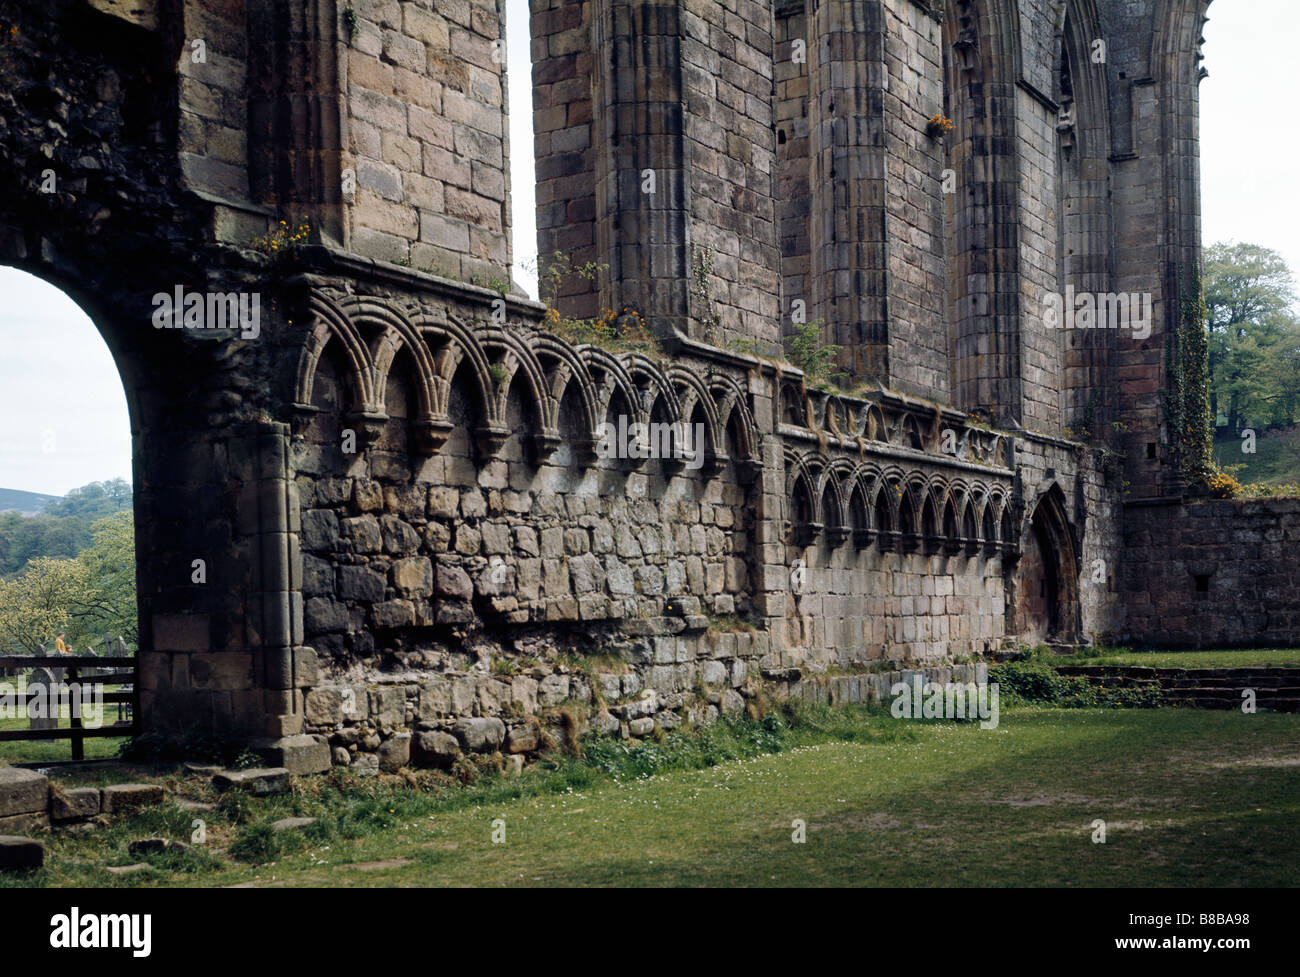 Bolton Abbey Yorkshire. Ruins of 12th century Augustinian priory. Arcading Stock Photo